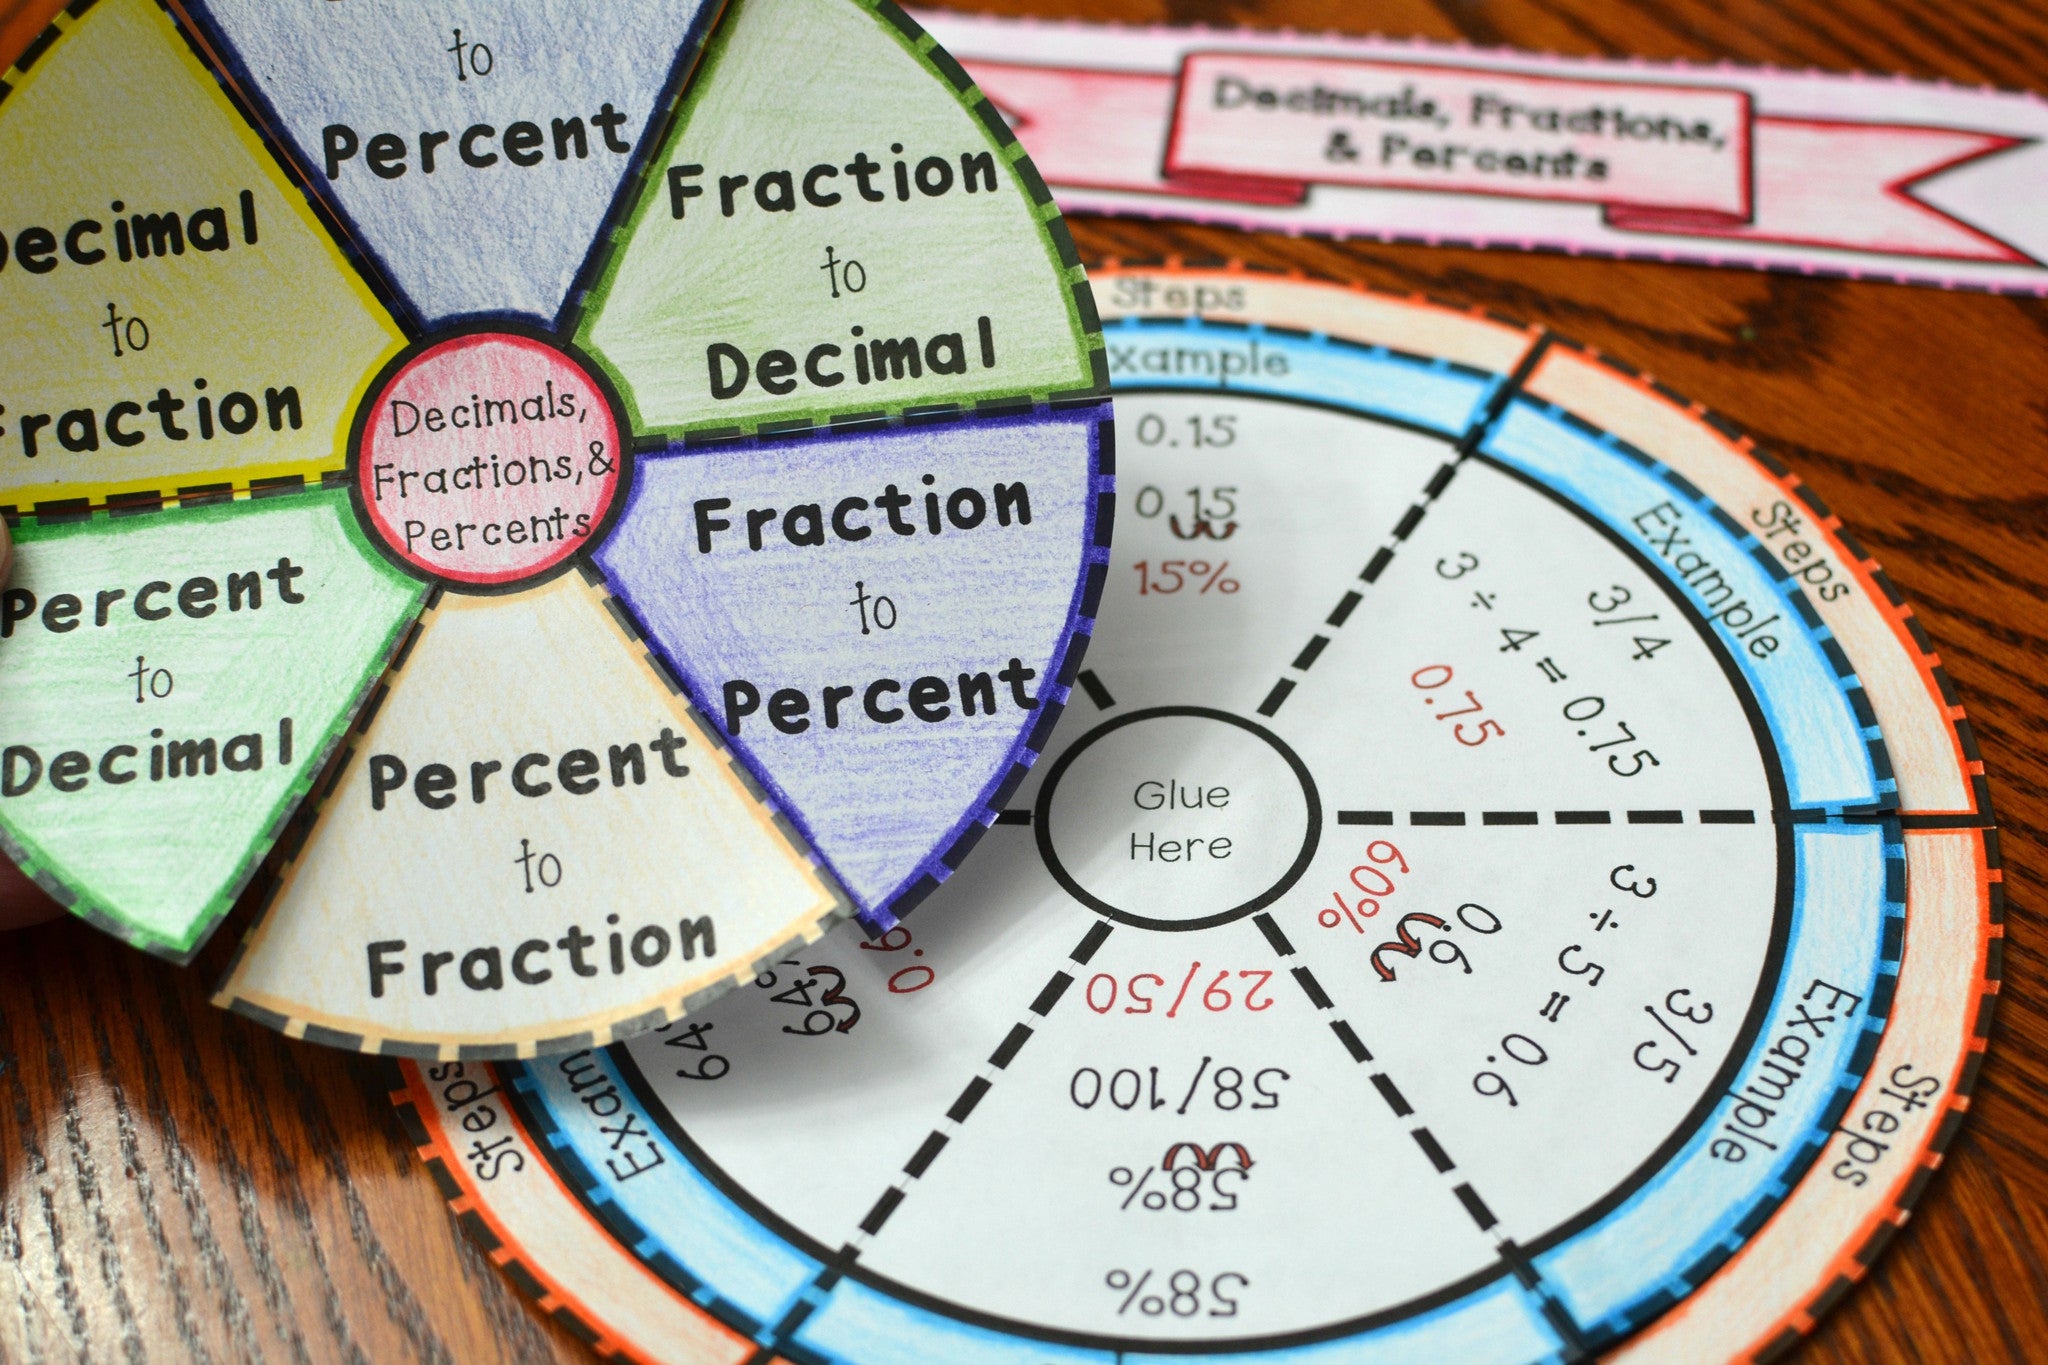 Decimals, Fractions, and Percents Wheel Spinner - Math in Demand